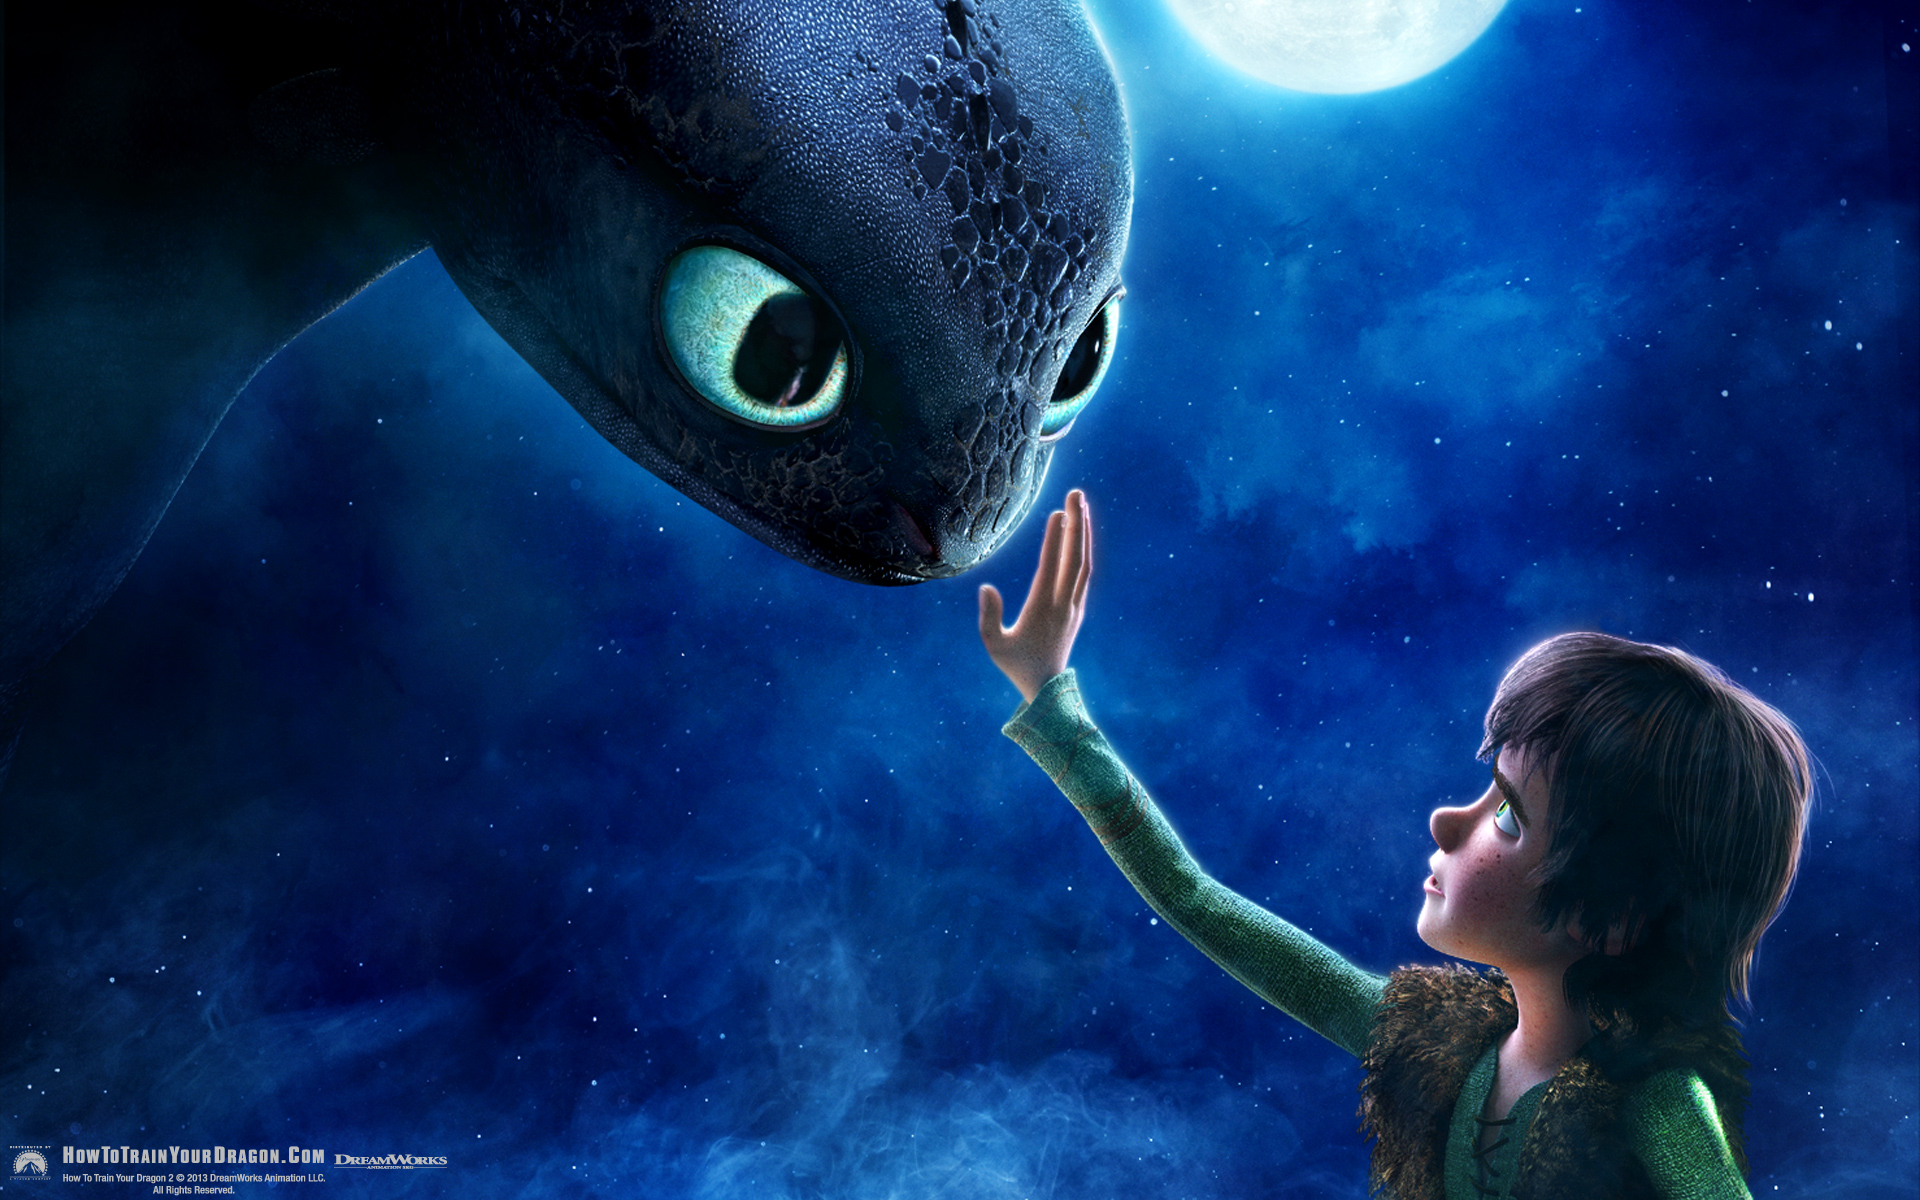 Gallery For Gt Toothless And Hiccup Touch